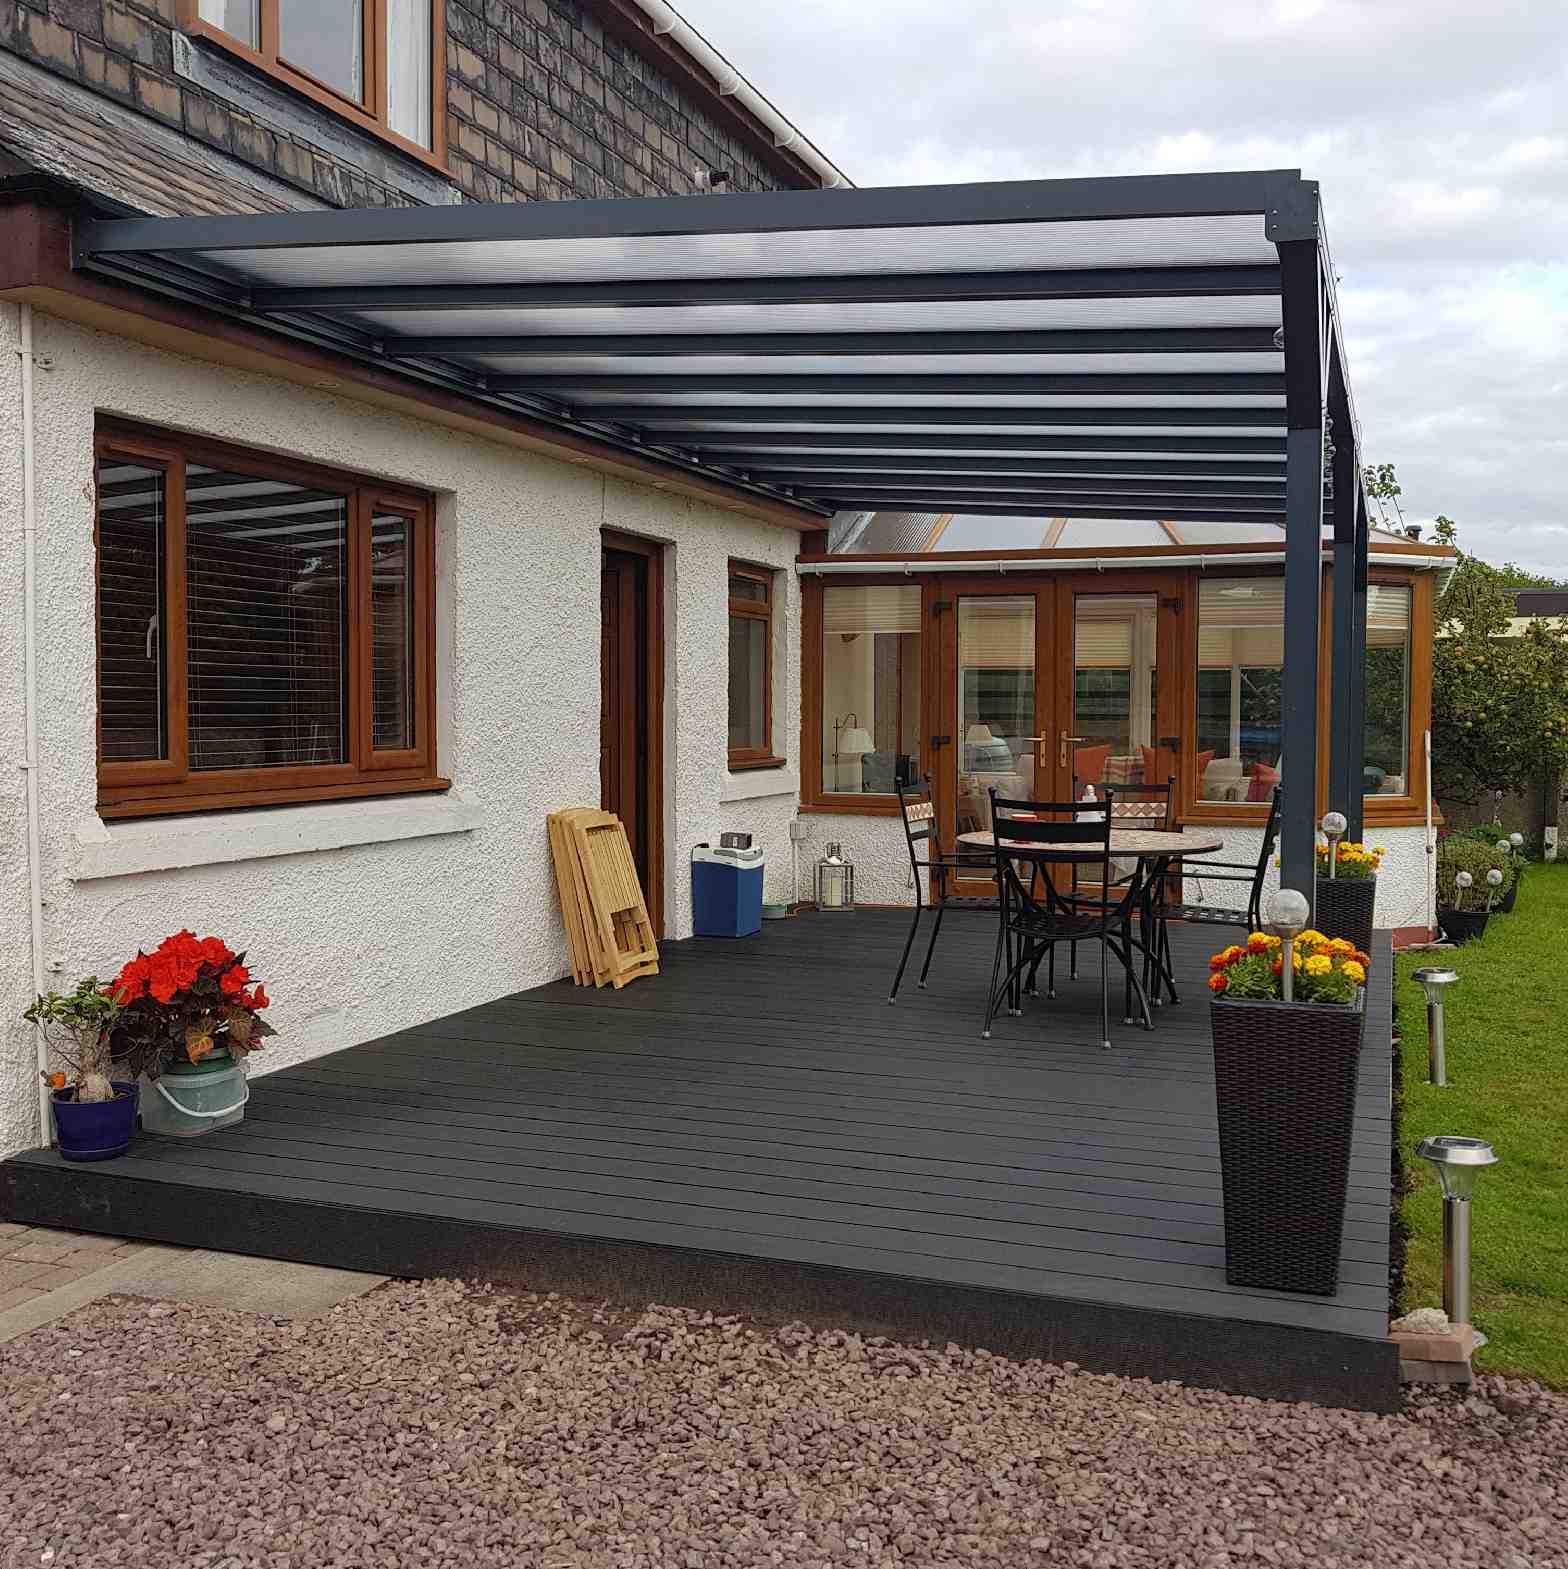 Buy Omega Verandah, Anthracite Grey, 16mm Polycarbonate Glazing - 12.0m (W) x 3.5m (P), (5) Supporting Posts online today